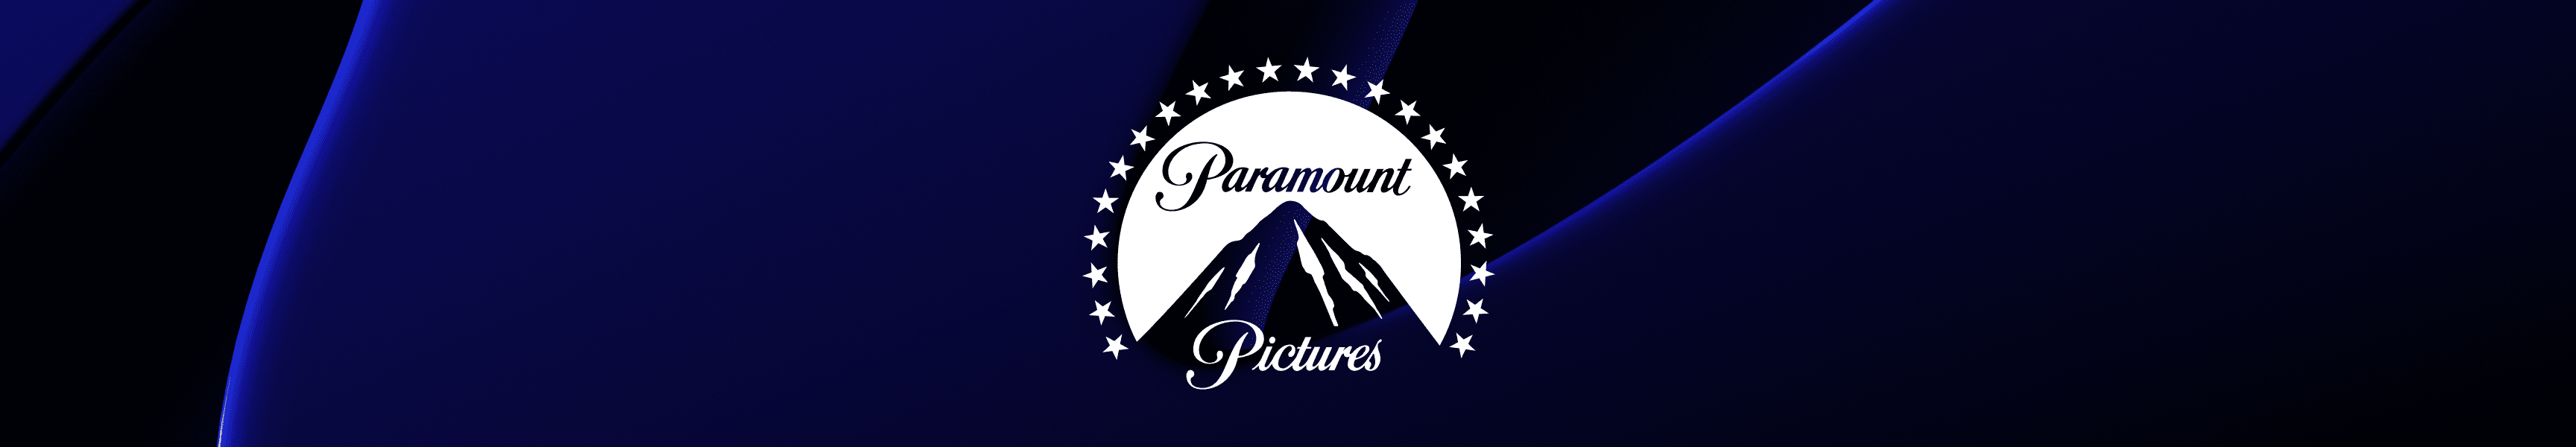 Paramount Pictures Coasters